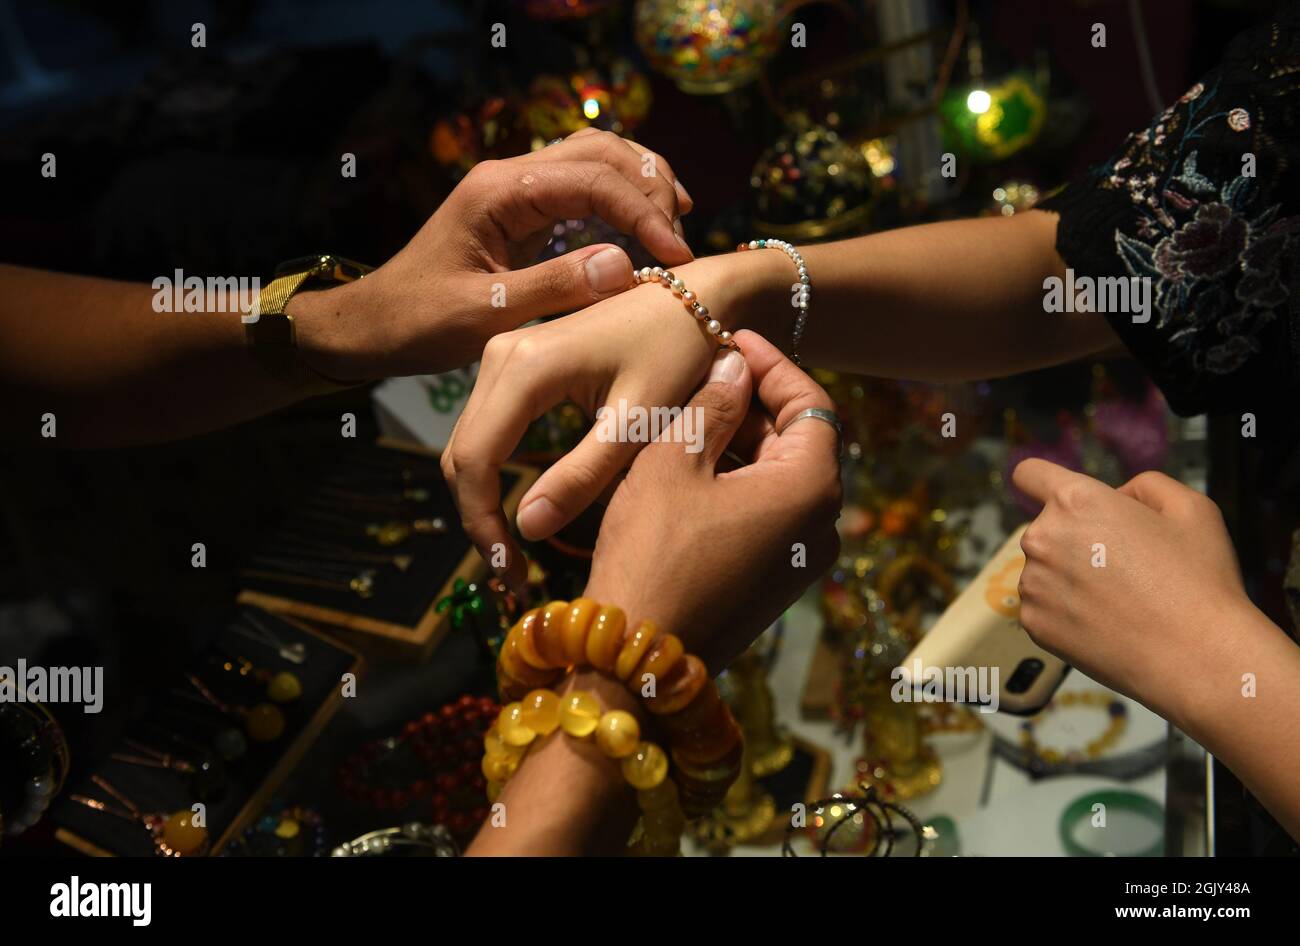 210912) -- NANNING, Sept. 12, 2021 (Xinhua) -- A visitor tries a bracelet  from Dubai during the 18th China-ASEAN Expo in Nanning, capital of south  China's Guangxi Zhuang Autonomous Region, Sept. 12,